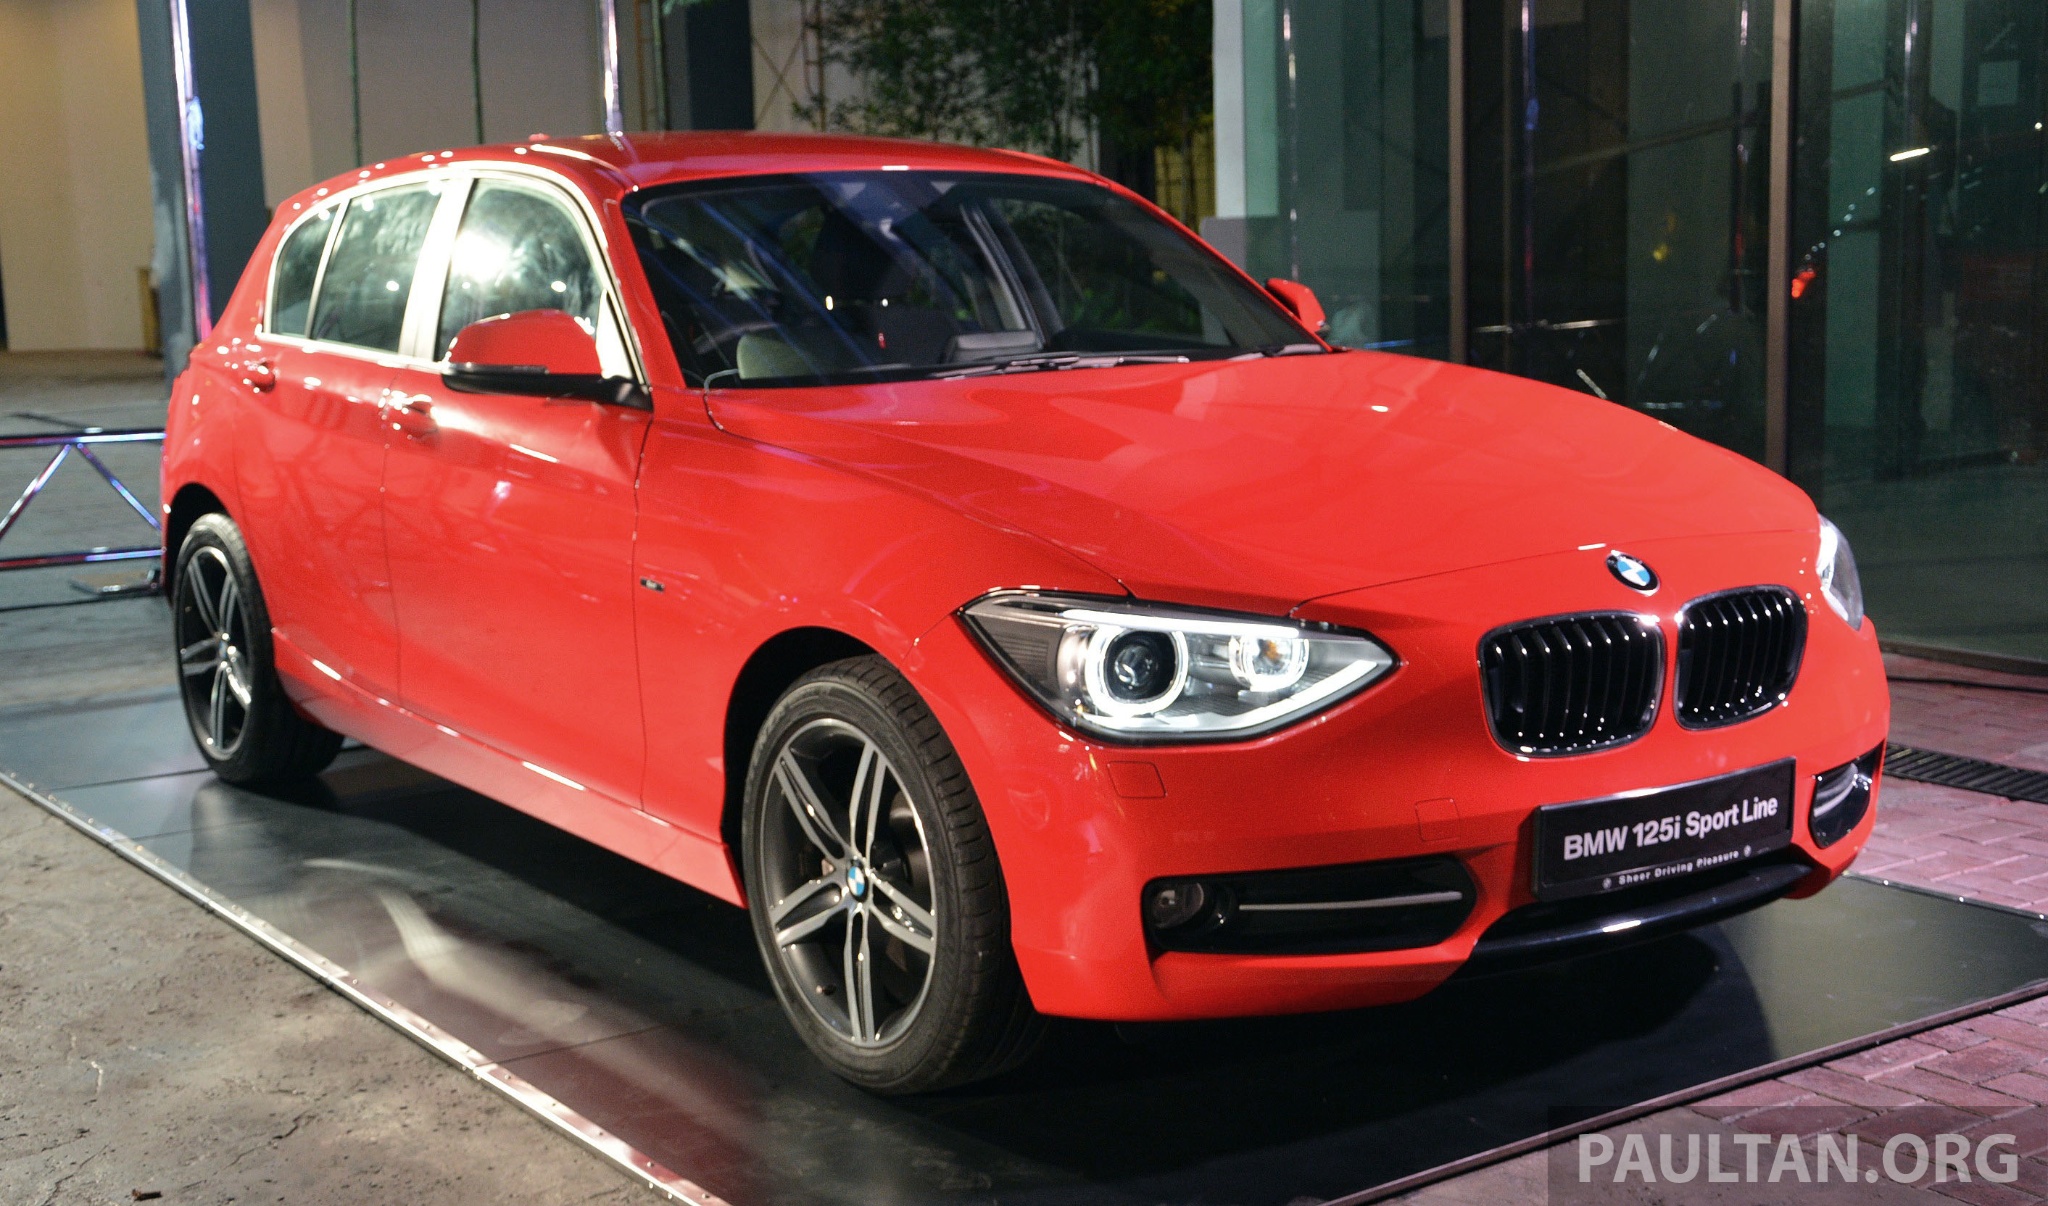 BMW 1 Series (F20) launched in Malaysia 116i, 118i Sport